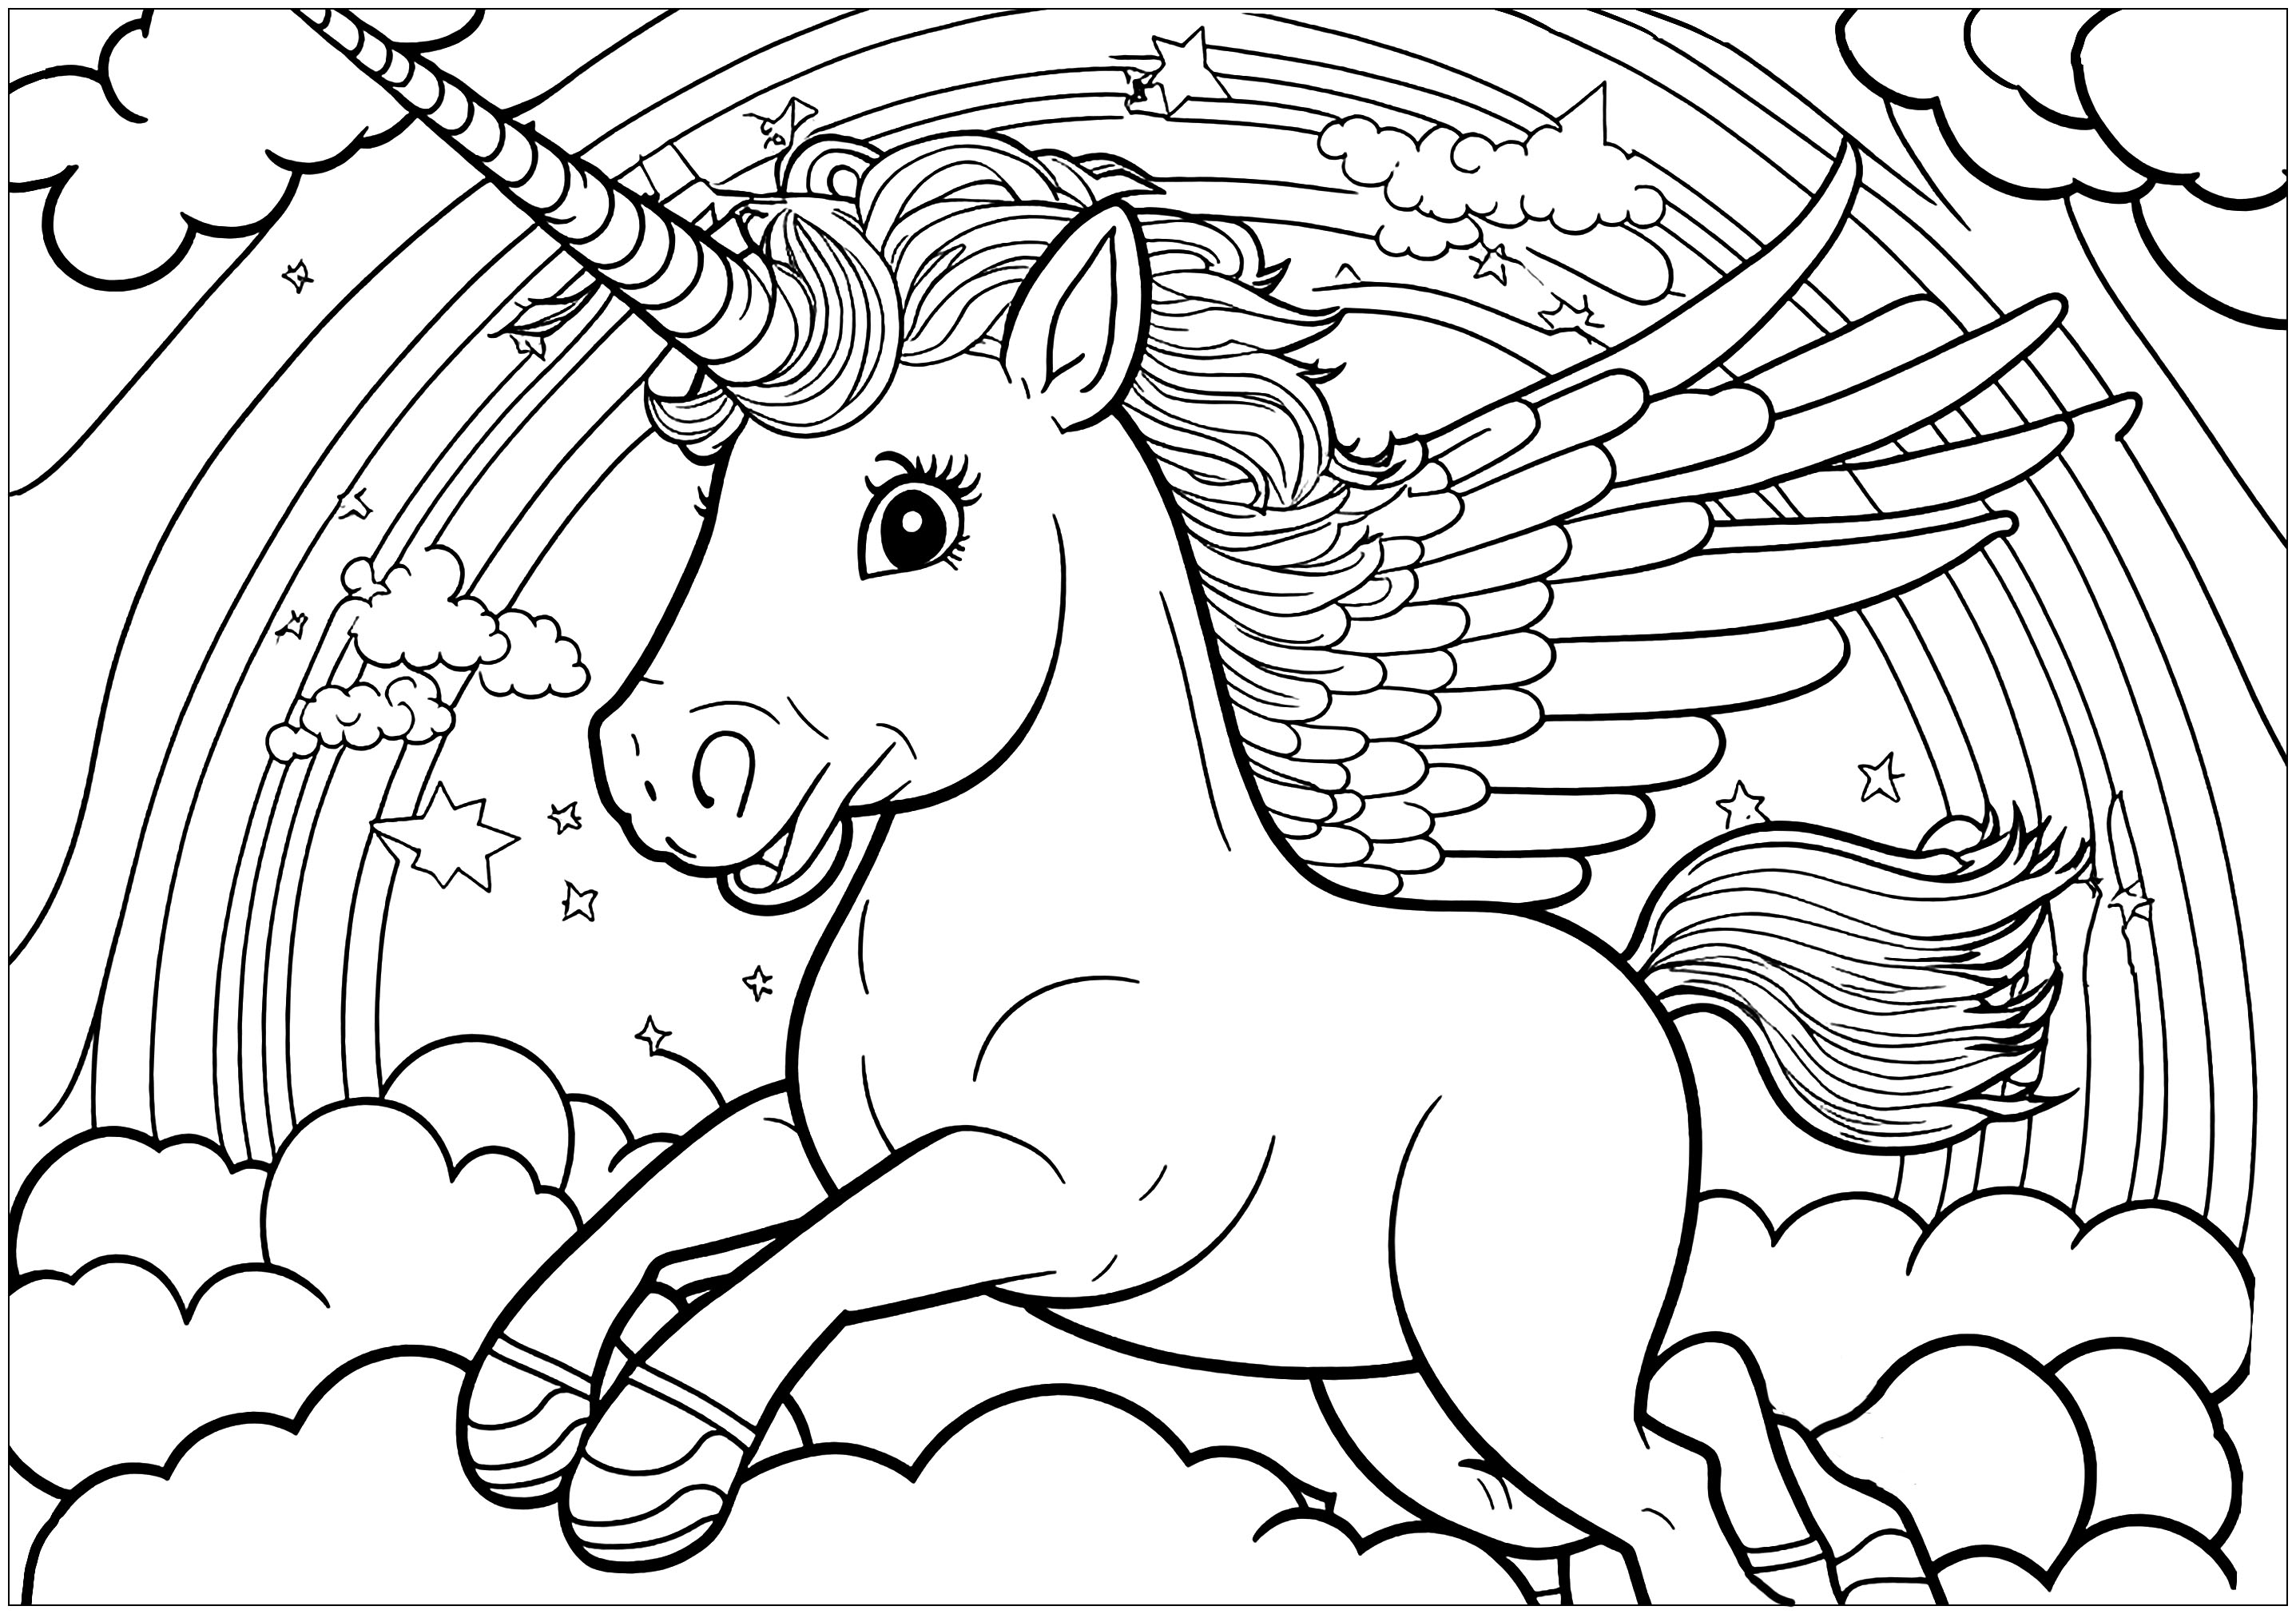 Coloring Pages For Children Unicorns 16987 